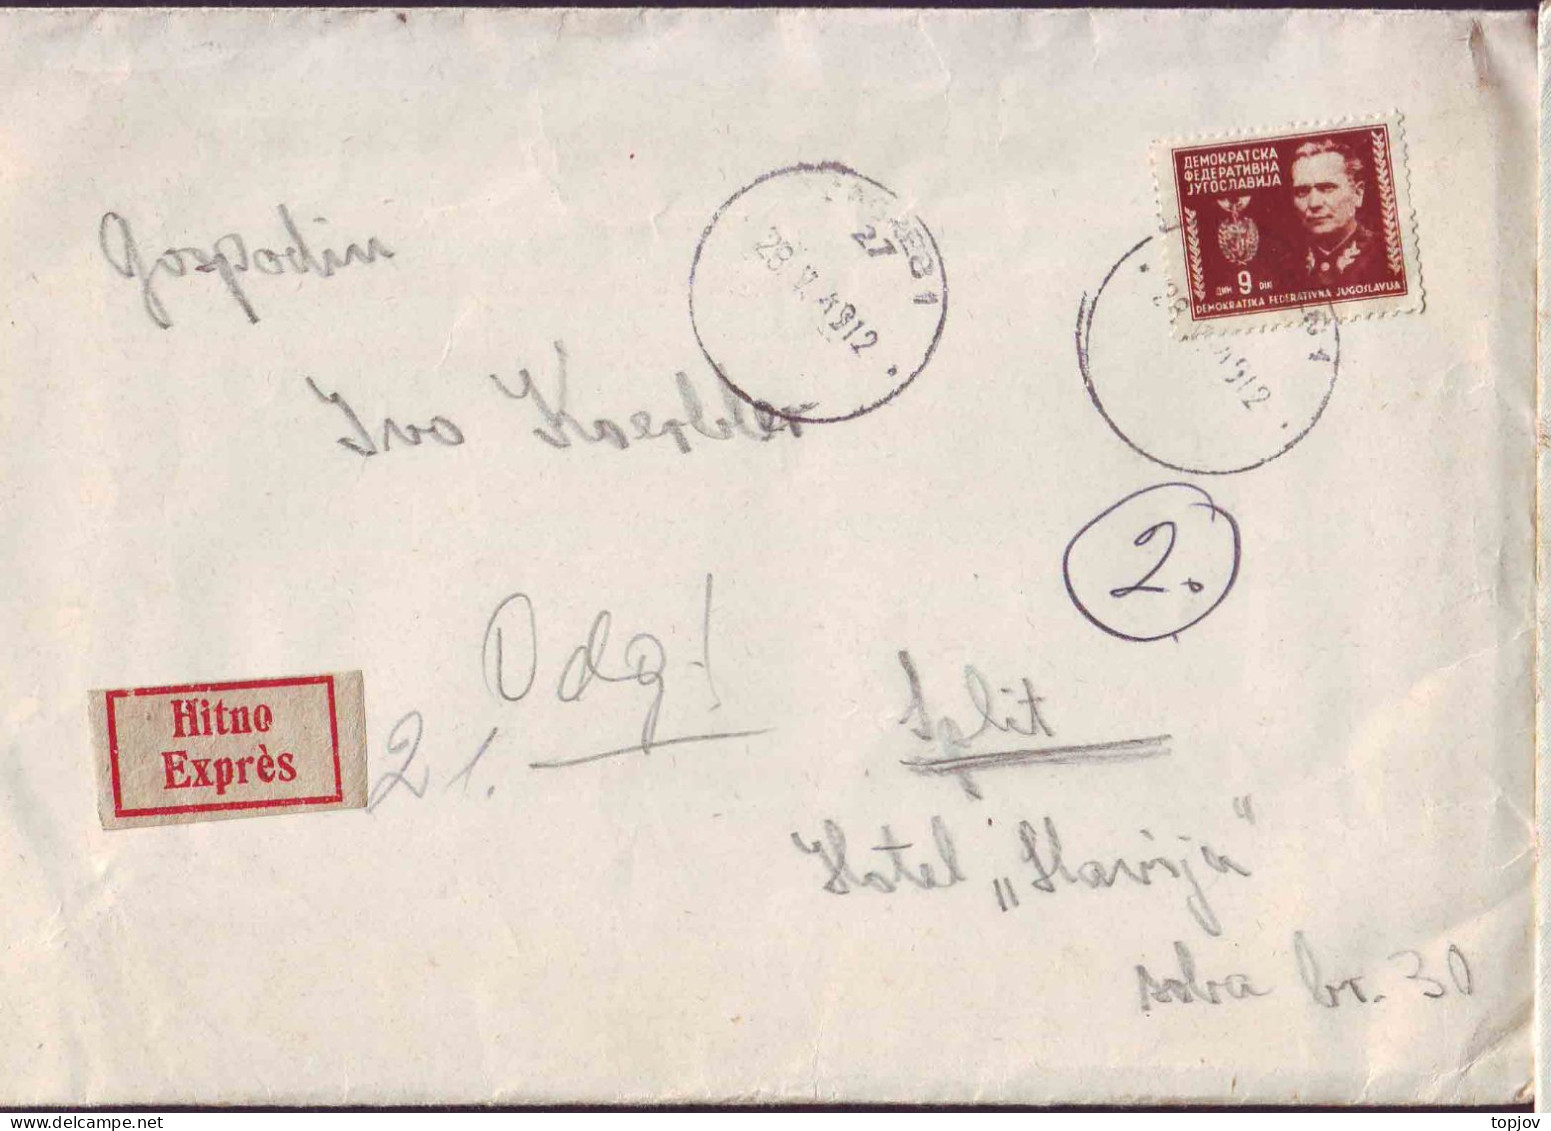 JUGOSLAVIA - EXPRES. Letter  9din TITO  On Yellow Paper  BANJA LUKA To ZAGREB - 1949 - Aéreo